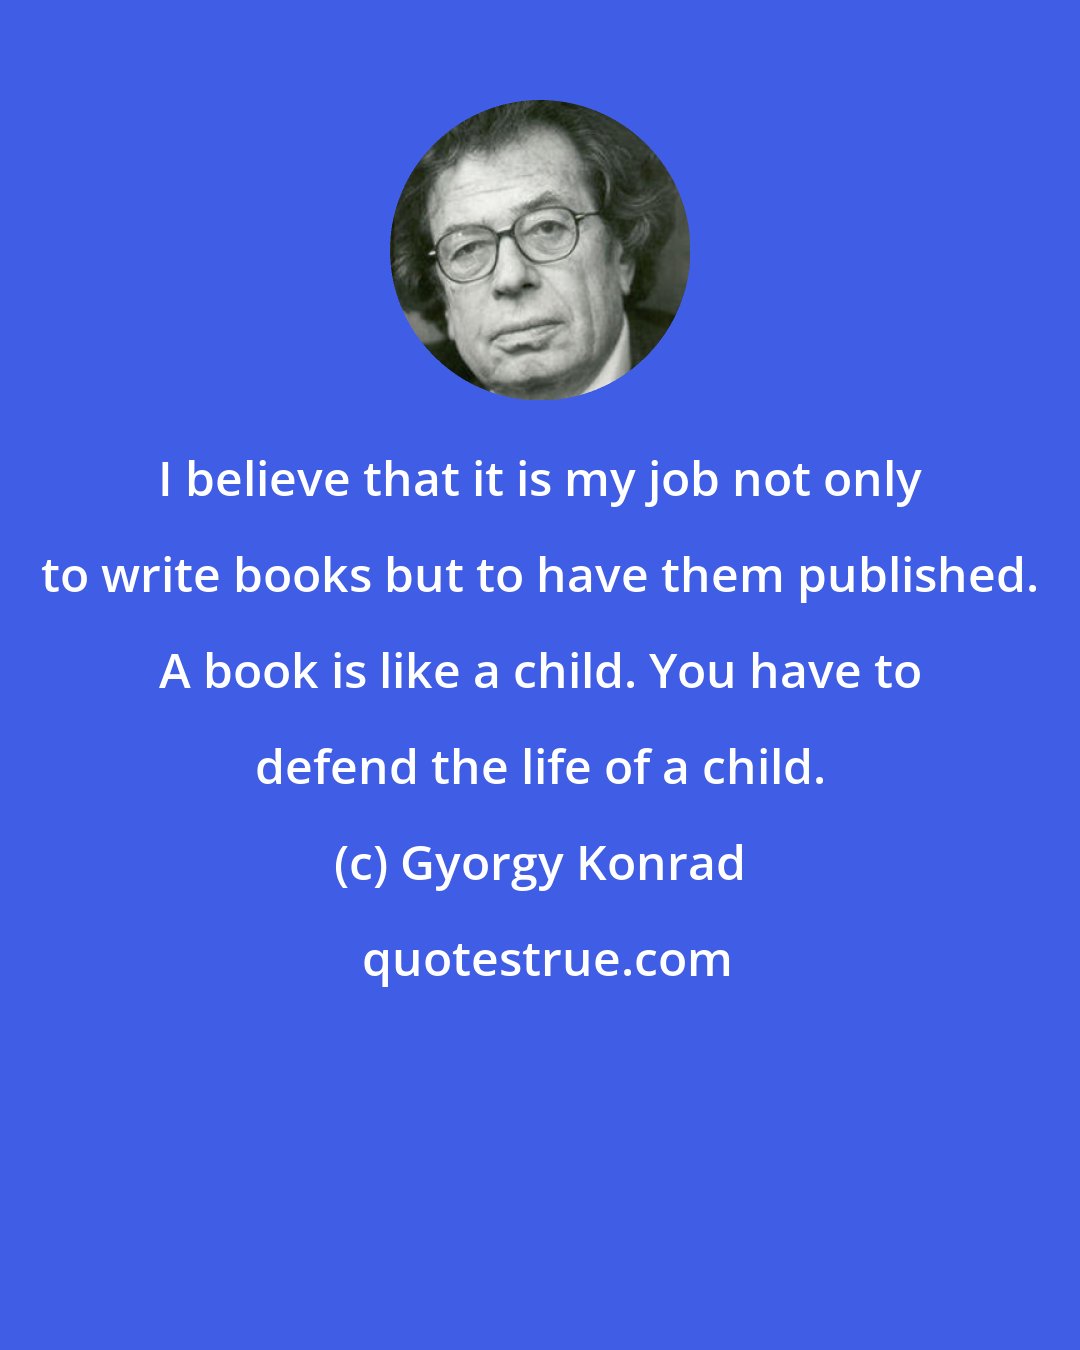 Gyorgy Konrad: I believe that it is my job not only to write books but to have them published. A book is like a child. You have to defend the life of a child.